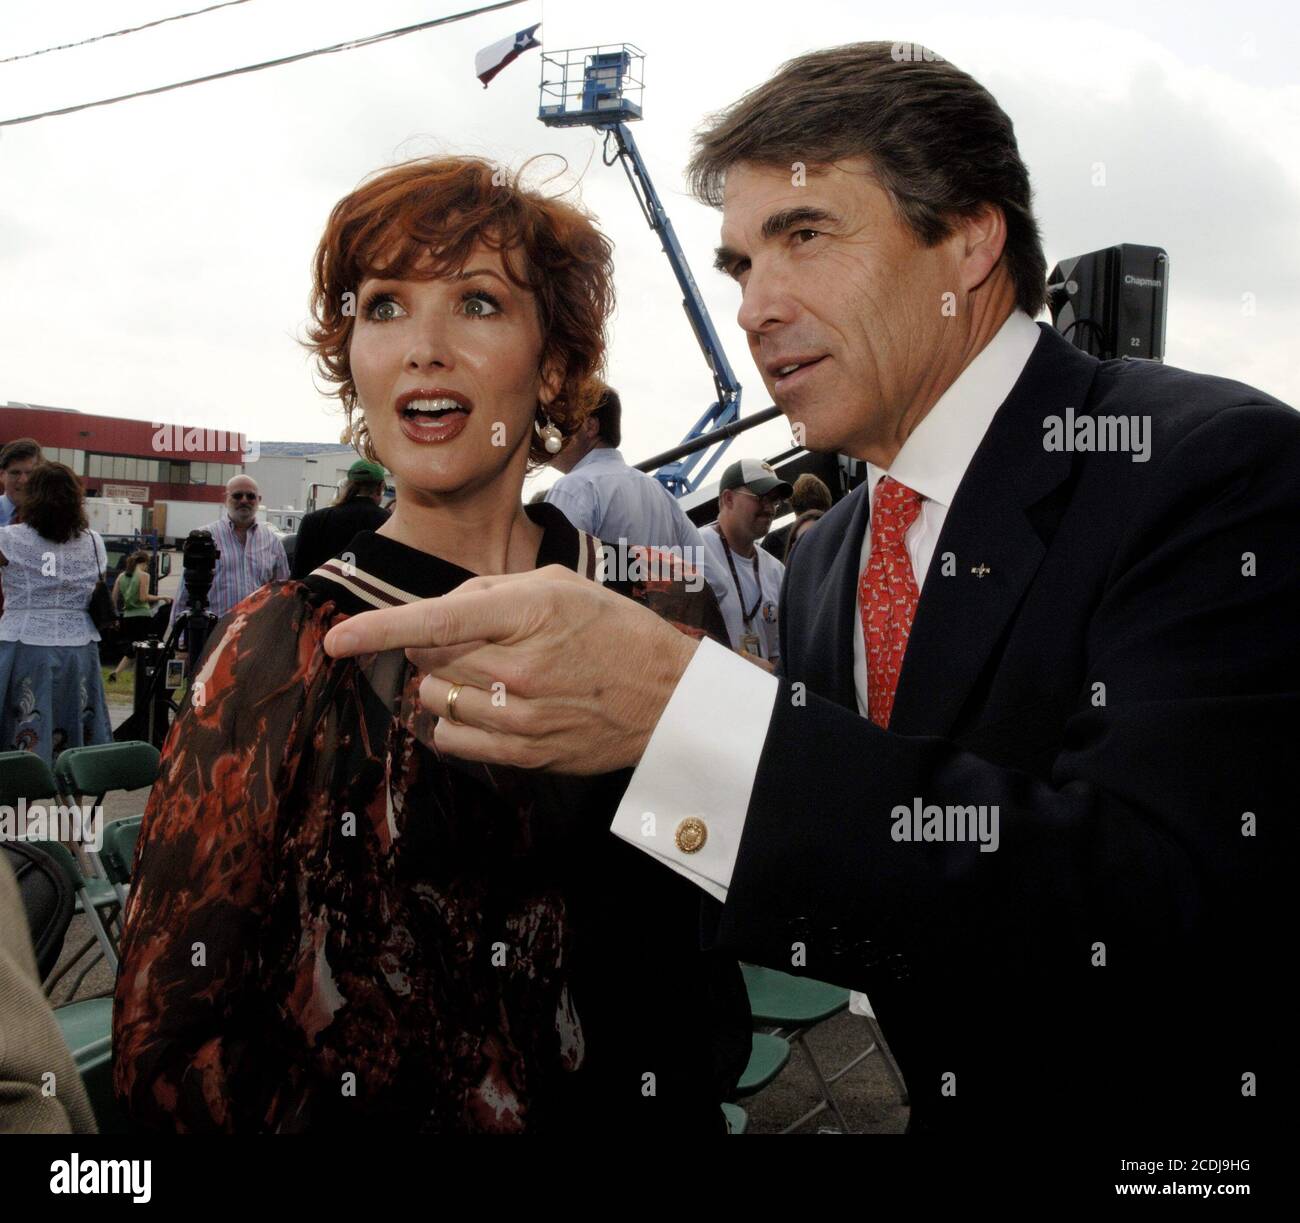 Austin, TX June 7, 2007:  Actress Janine Turner (l) known for her role in 'Northern Exposure'  joins Texas Governor Rick Perry (l) at Austin Studios as Perry signed a bill that that gives $22 million in incentives for the film industry to locate productions in Texas. ©Bob Daemmrich Stock Photo